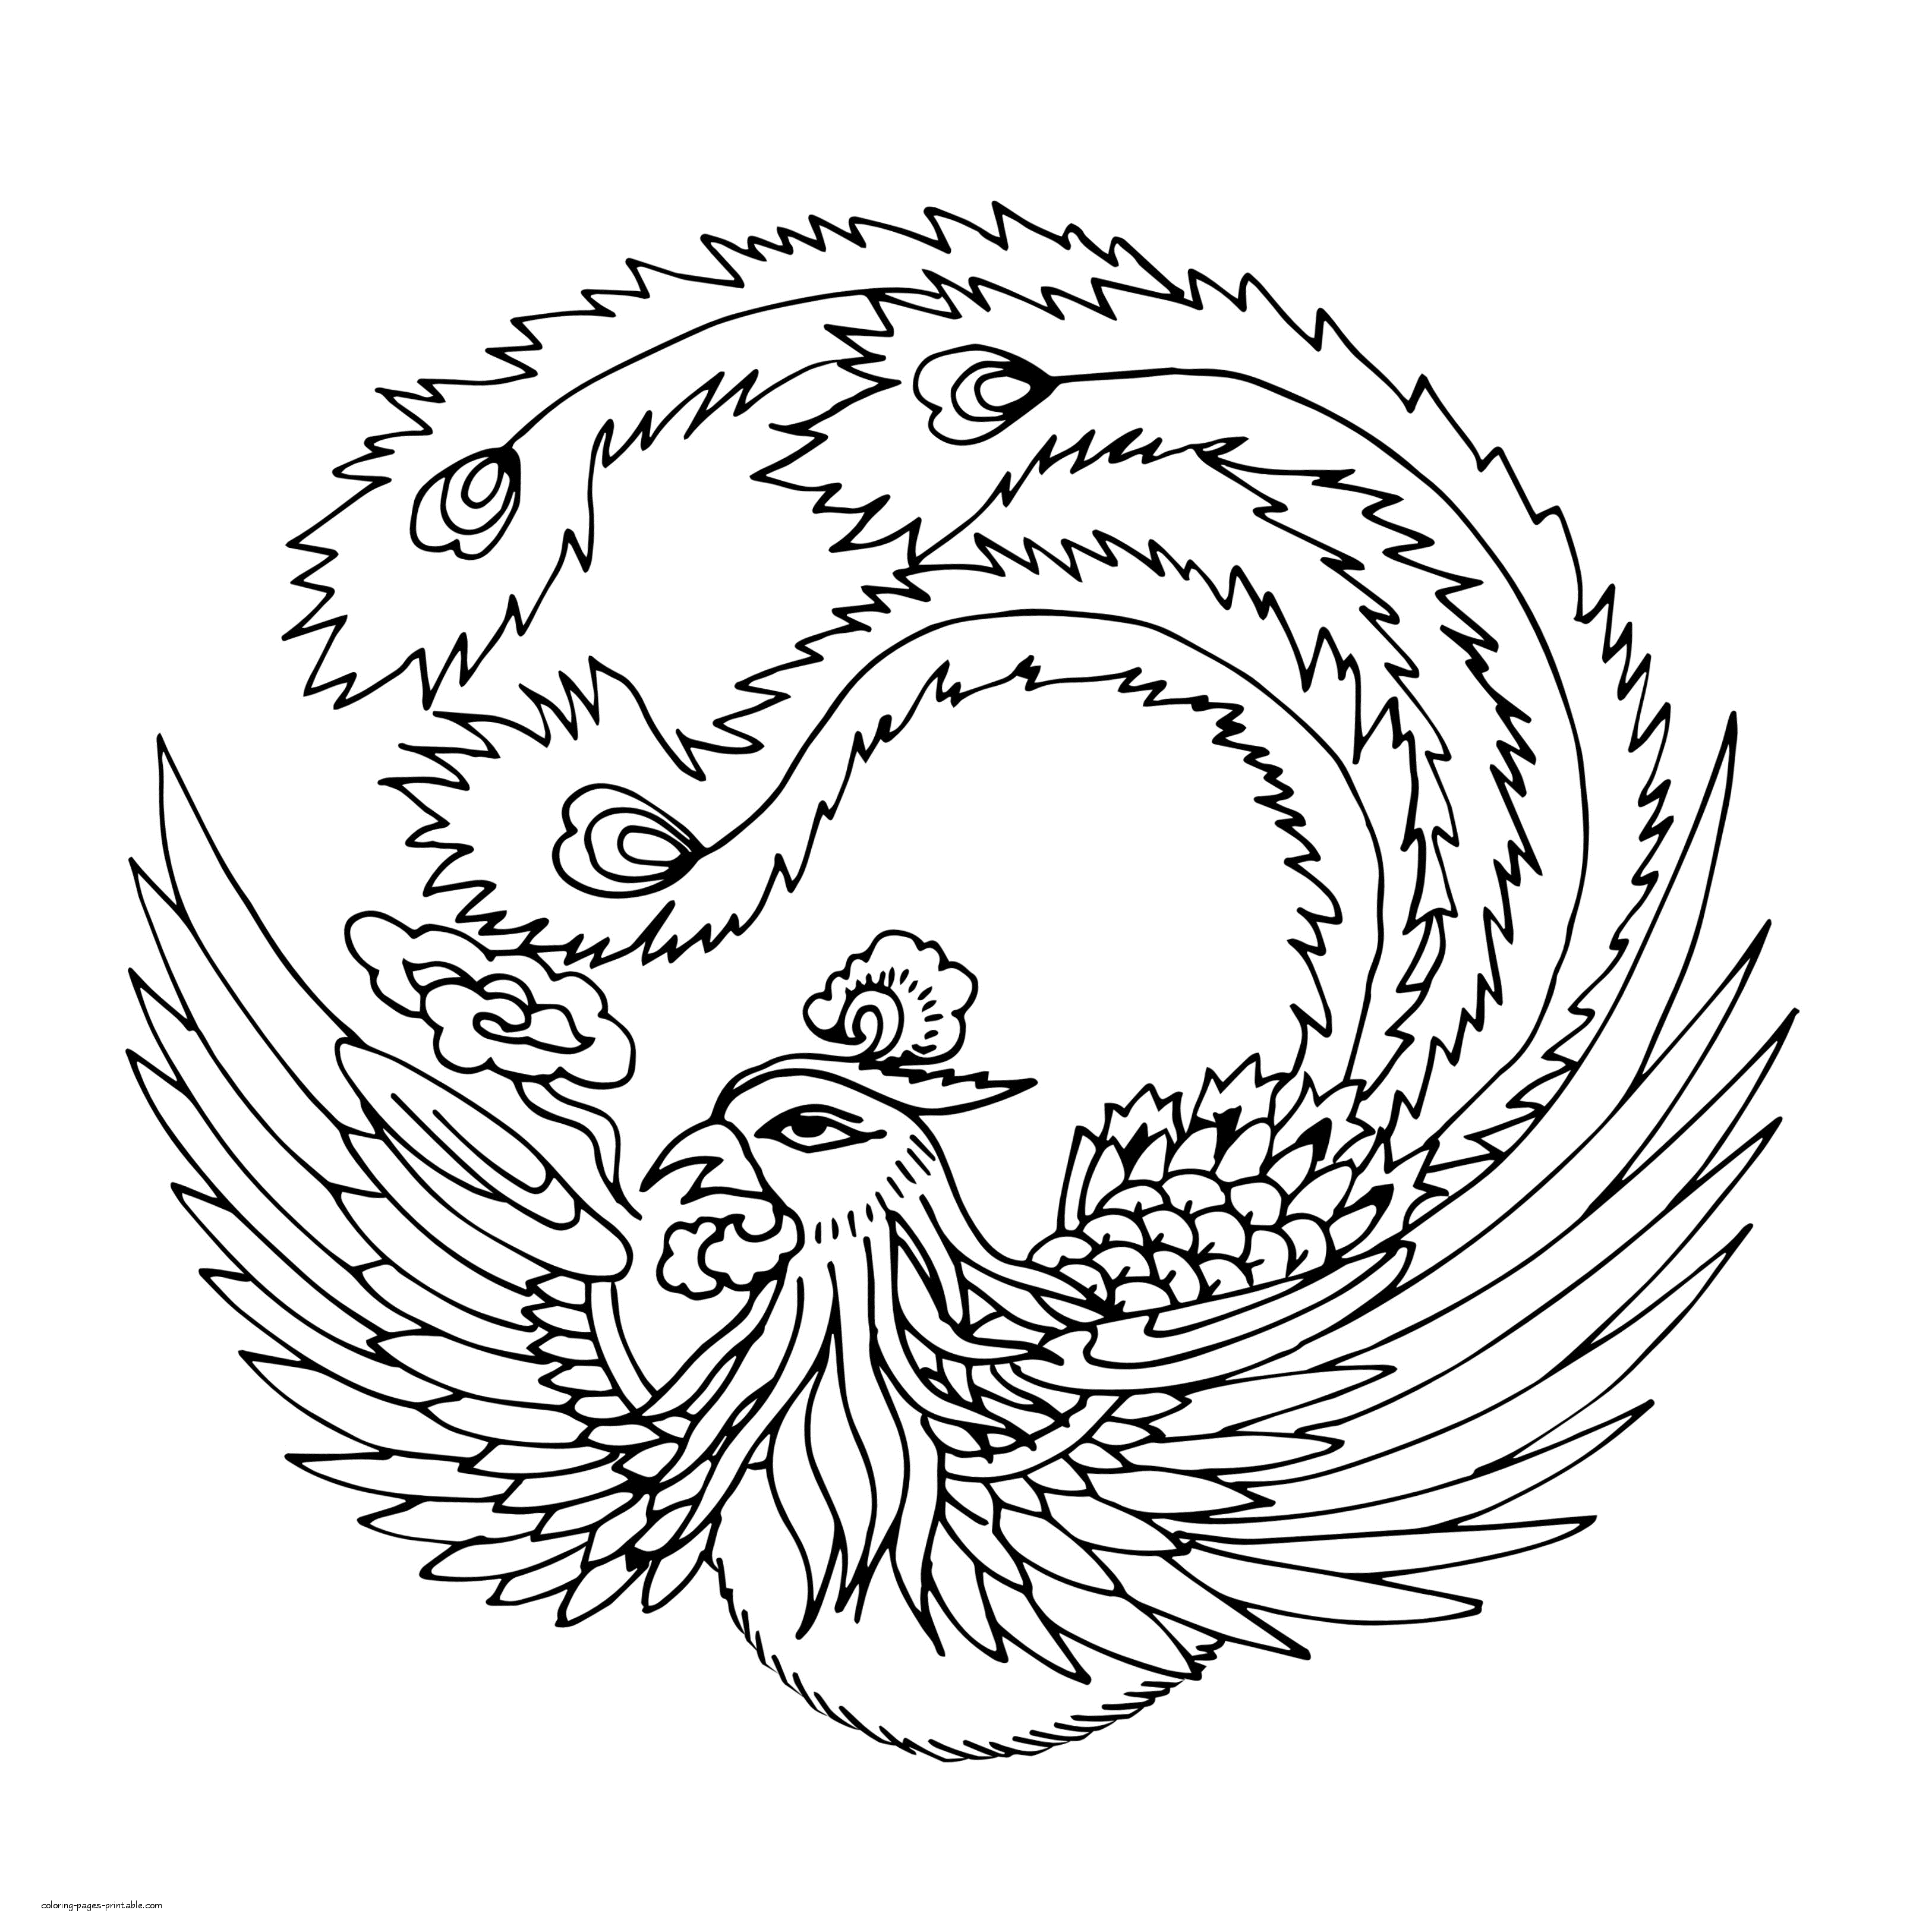 firebird-coloring-page-coloring-pages-printable-com